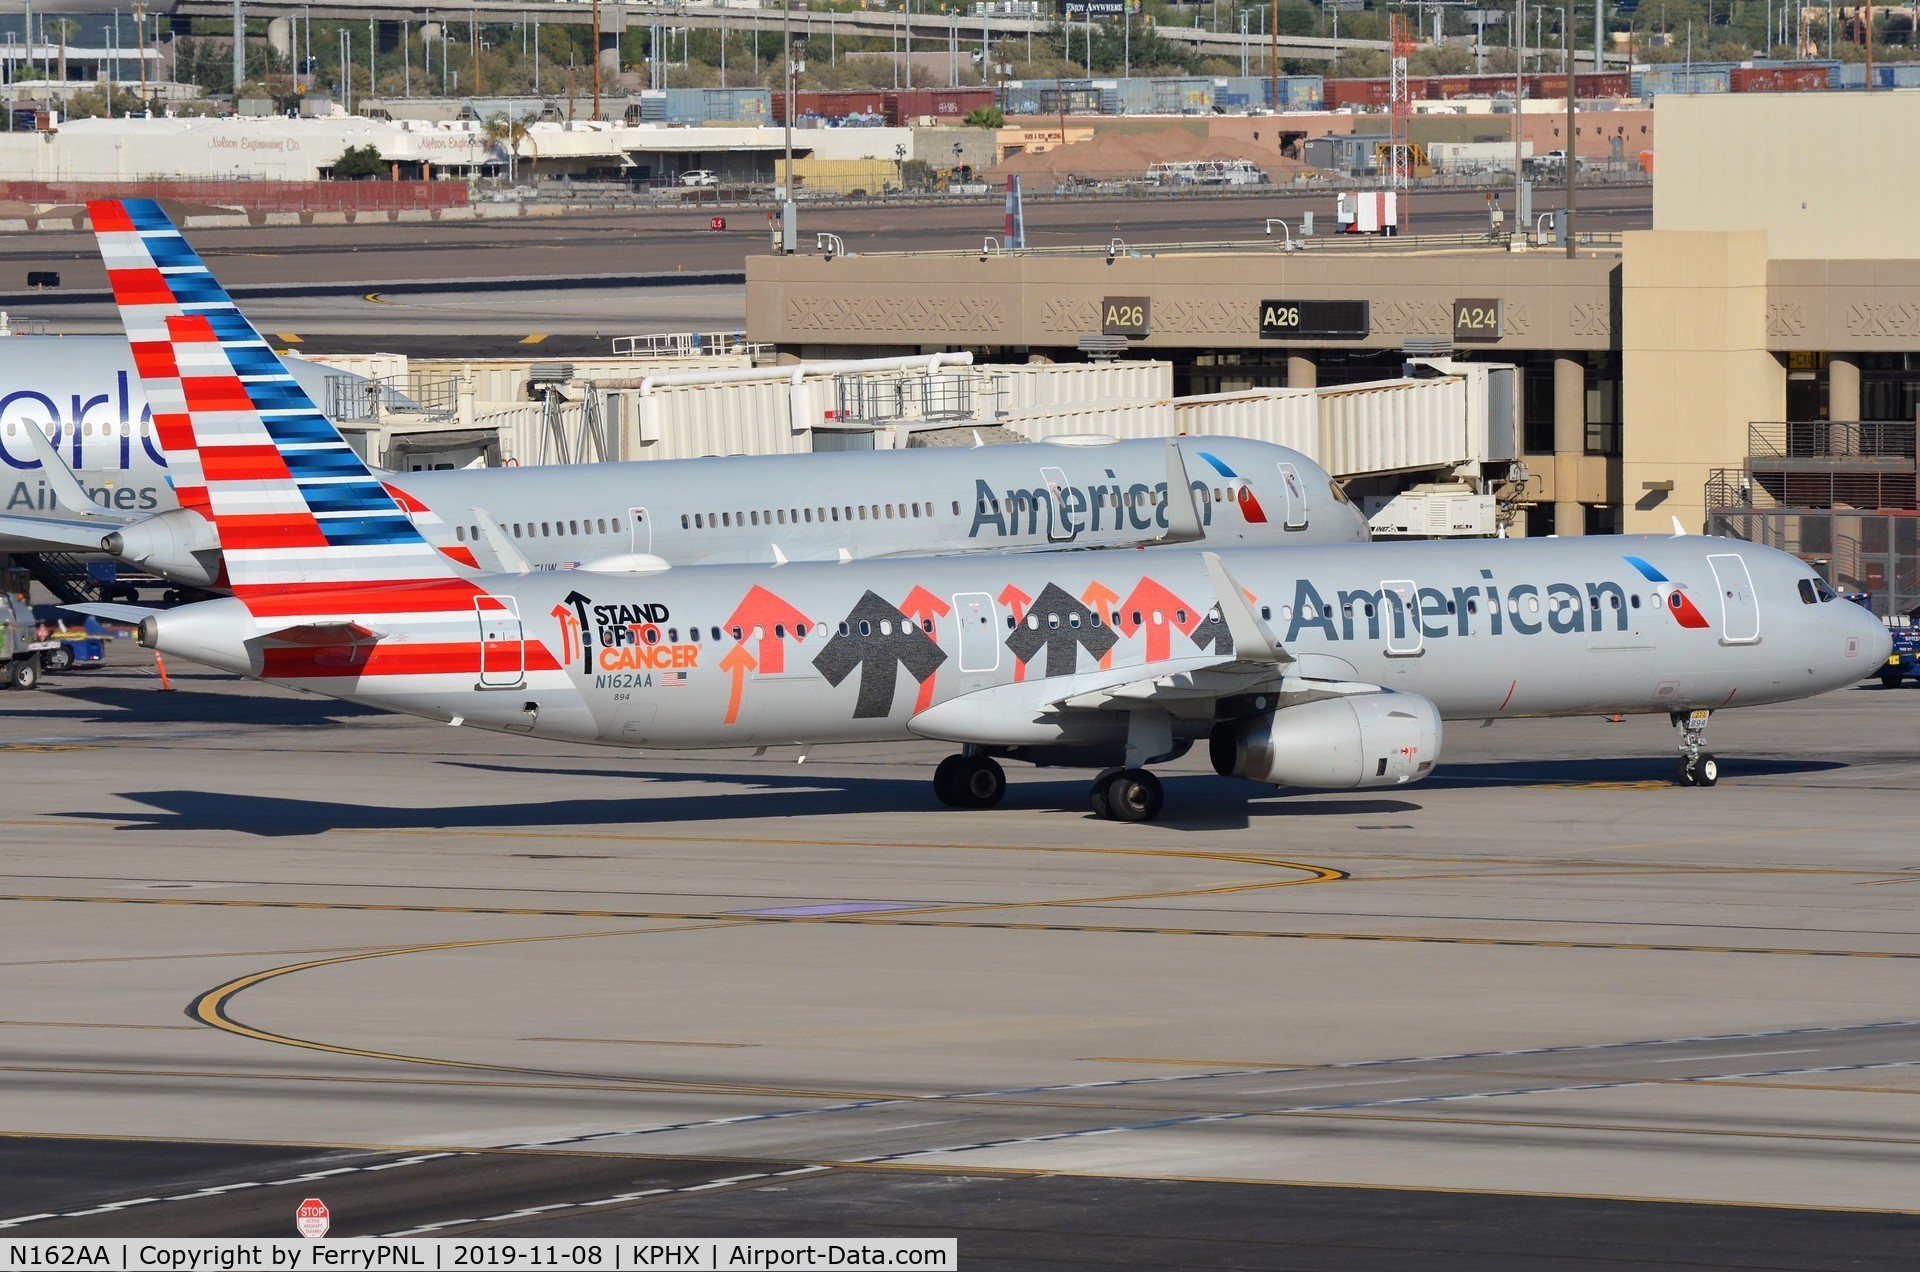 N162AA, 2016 Airbus A321-231 C/N 6621, American A321 stand up to cancer